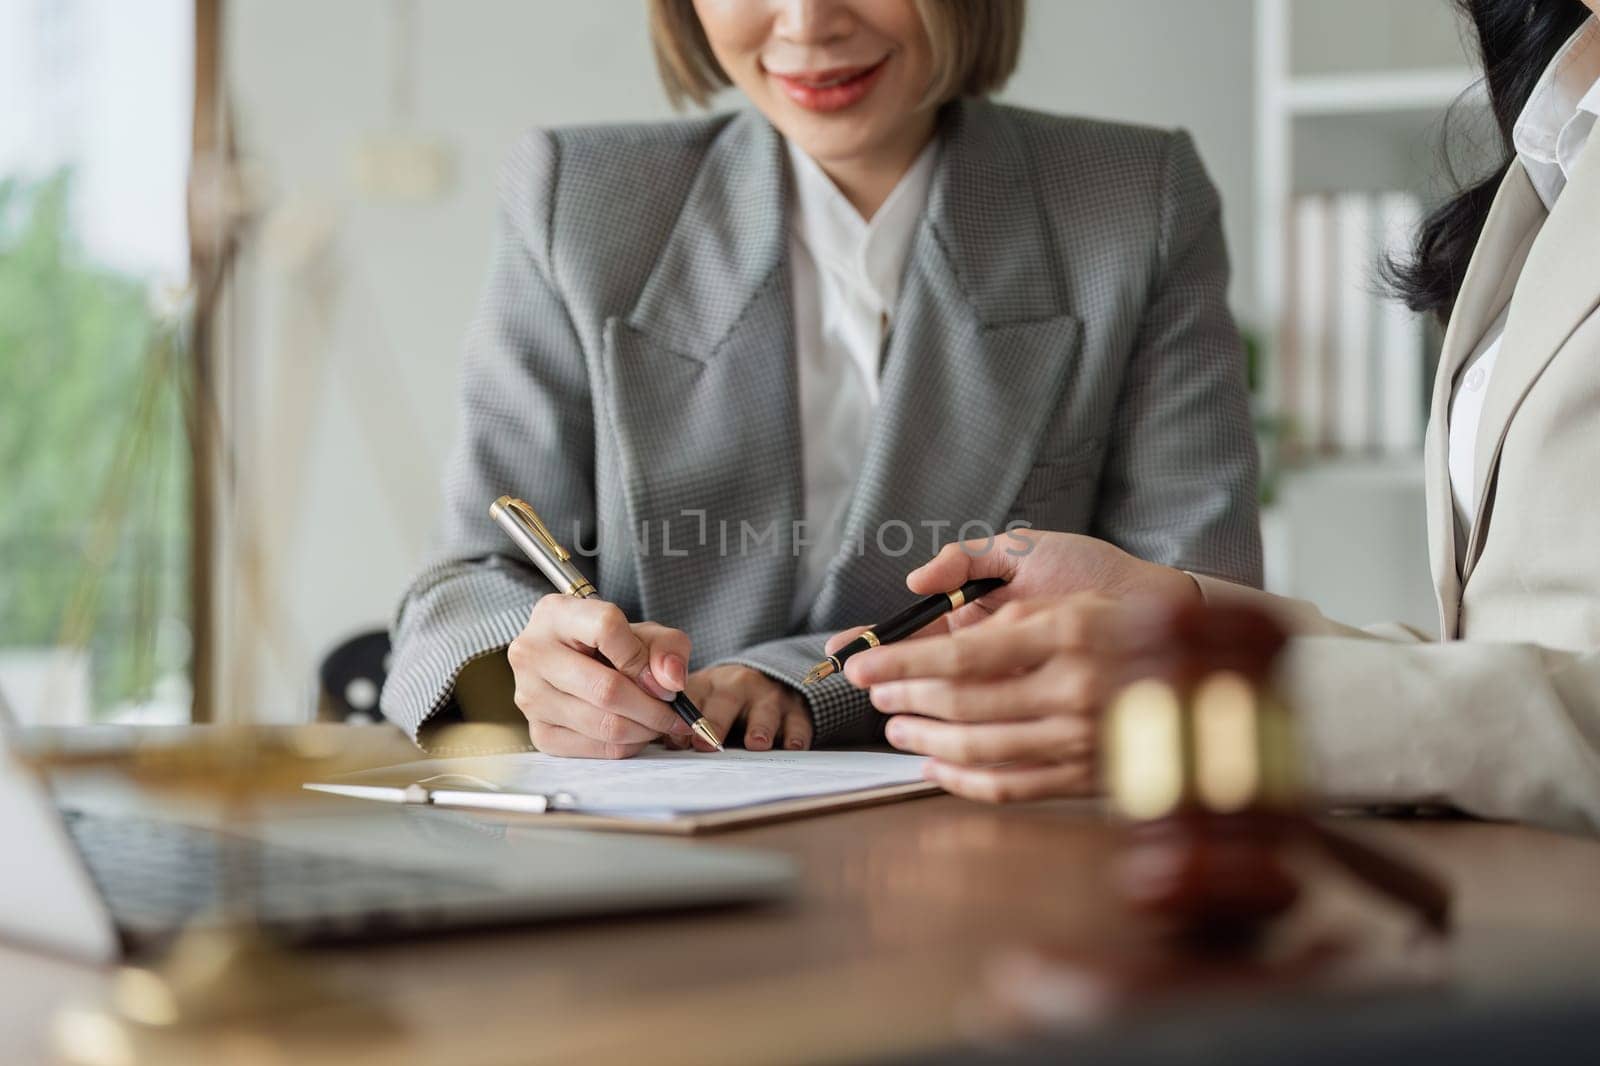 Lawyer advise client on business matter and advise them to sign document by itchaznong